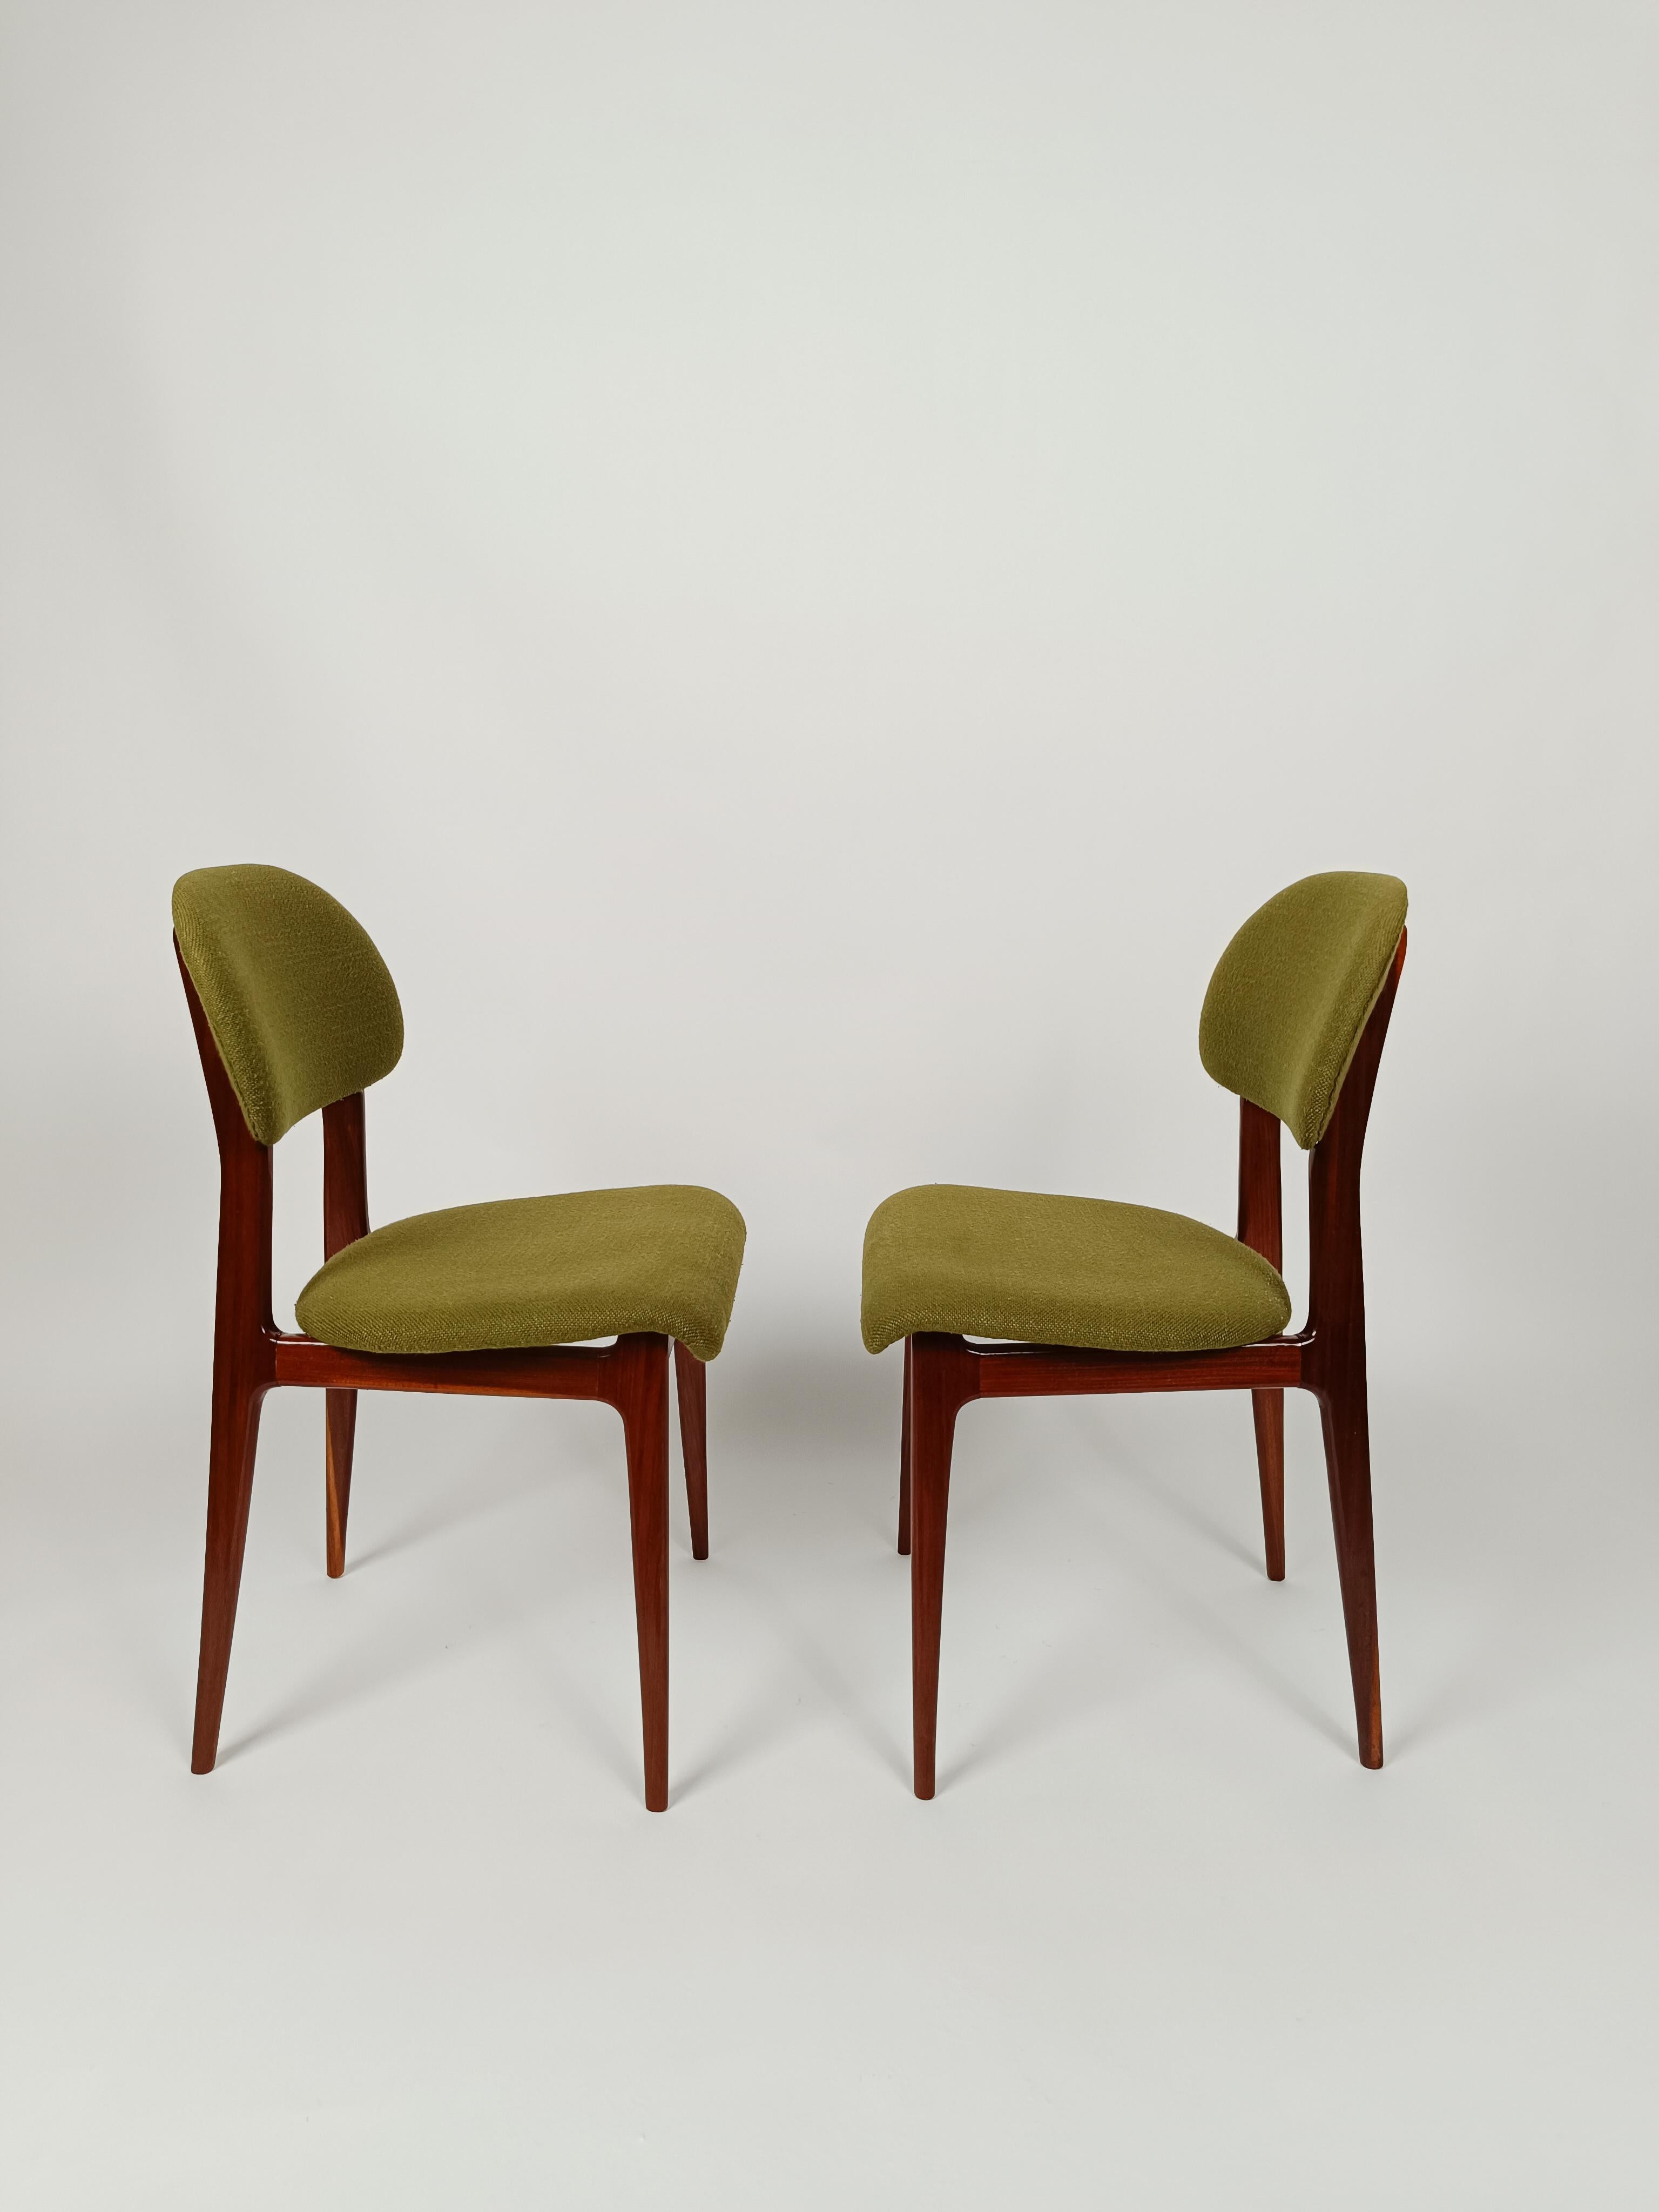 Italian Midcentury Chairs Attributed to Carlo Hauner and Martin Eisler, 1960s For Sale 9